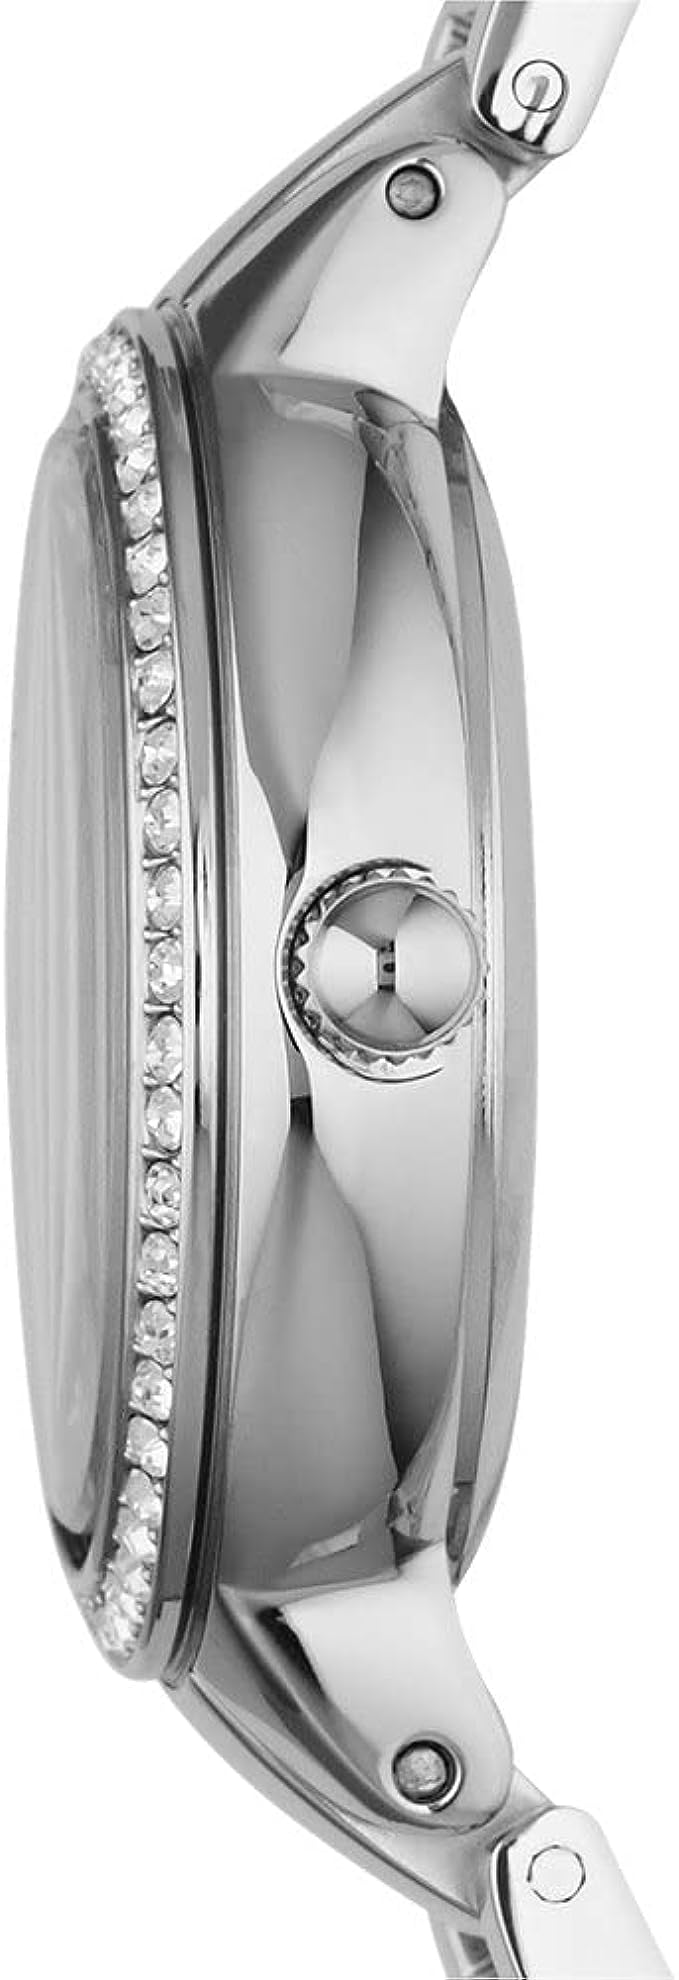 Fossil Women's Virginia Quartz Stainless Steel Dress Watch, Color Silver-Tone ES3282 - 3alababak